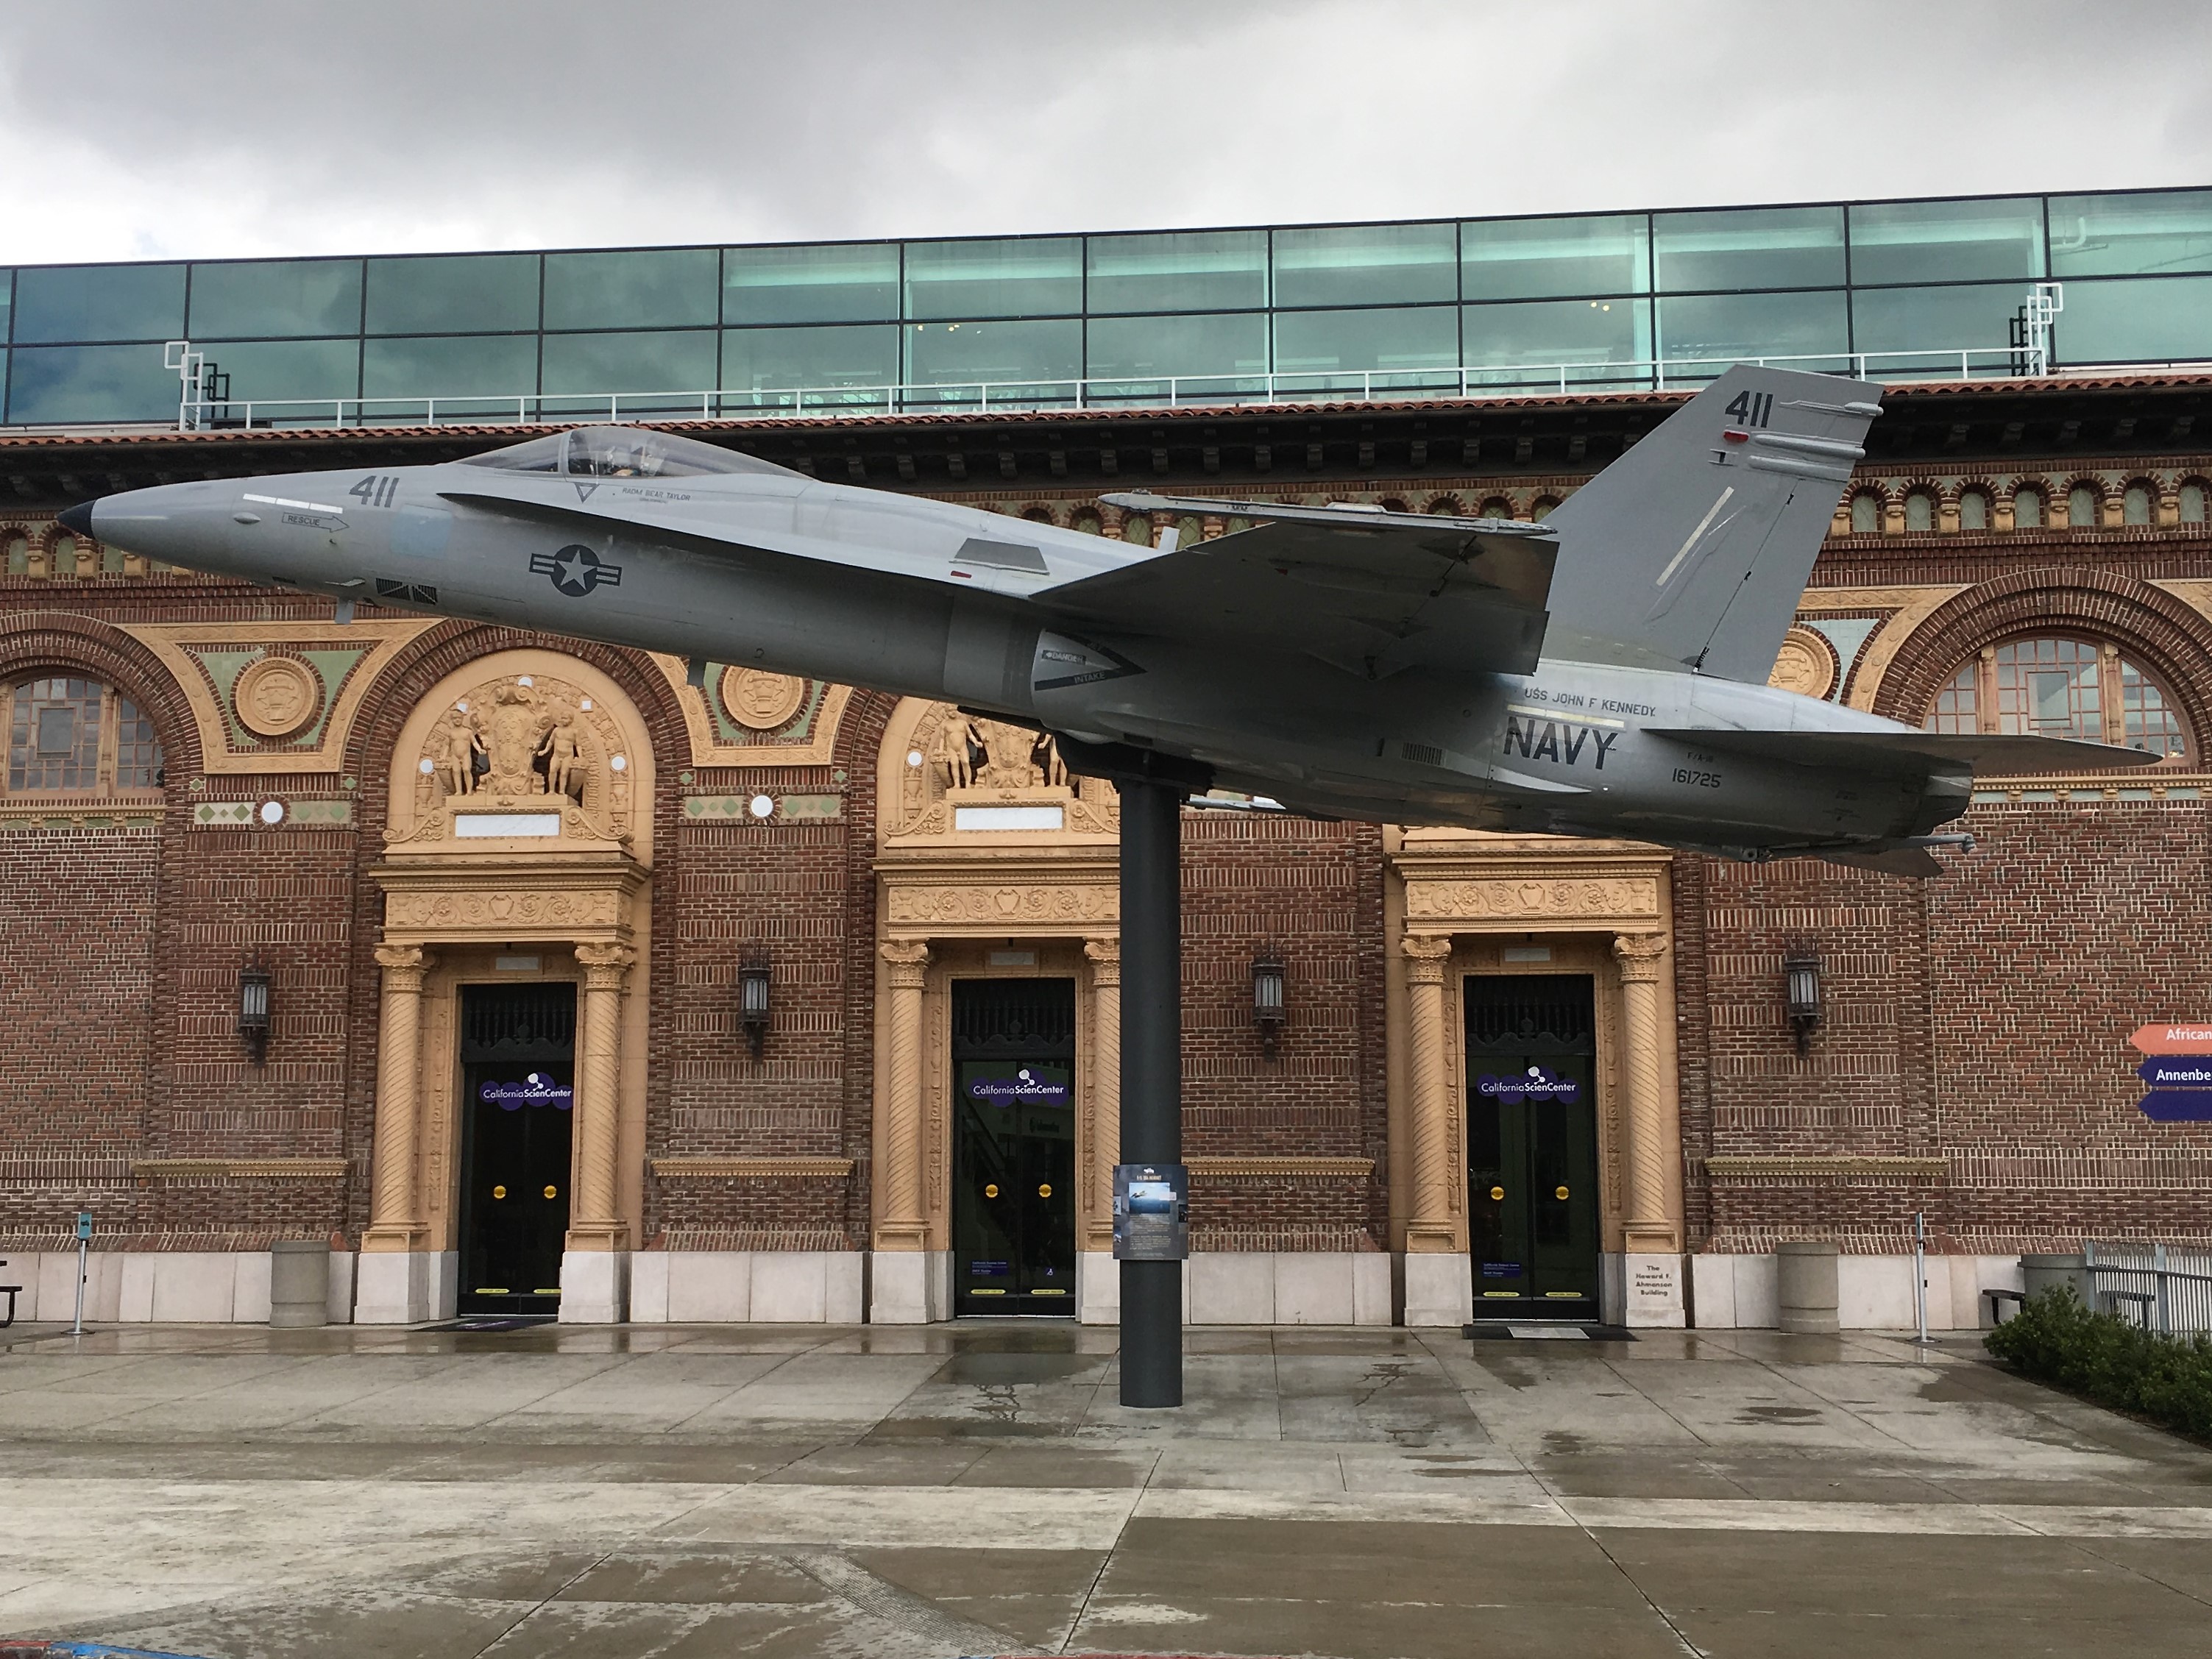  The F/A-18 outside the Science Center's north entrance, near the Rose Garden